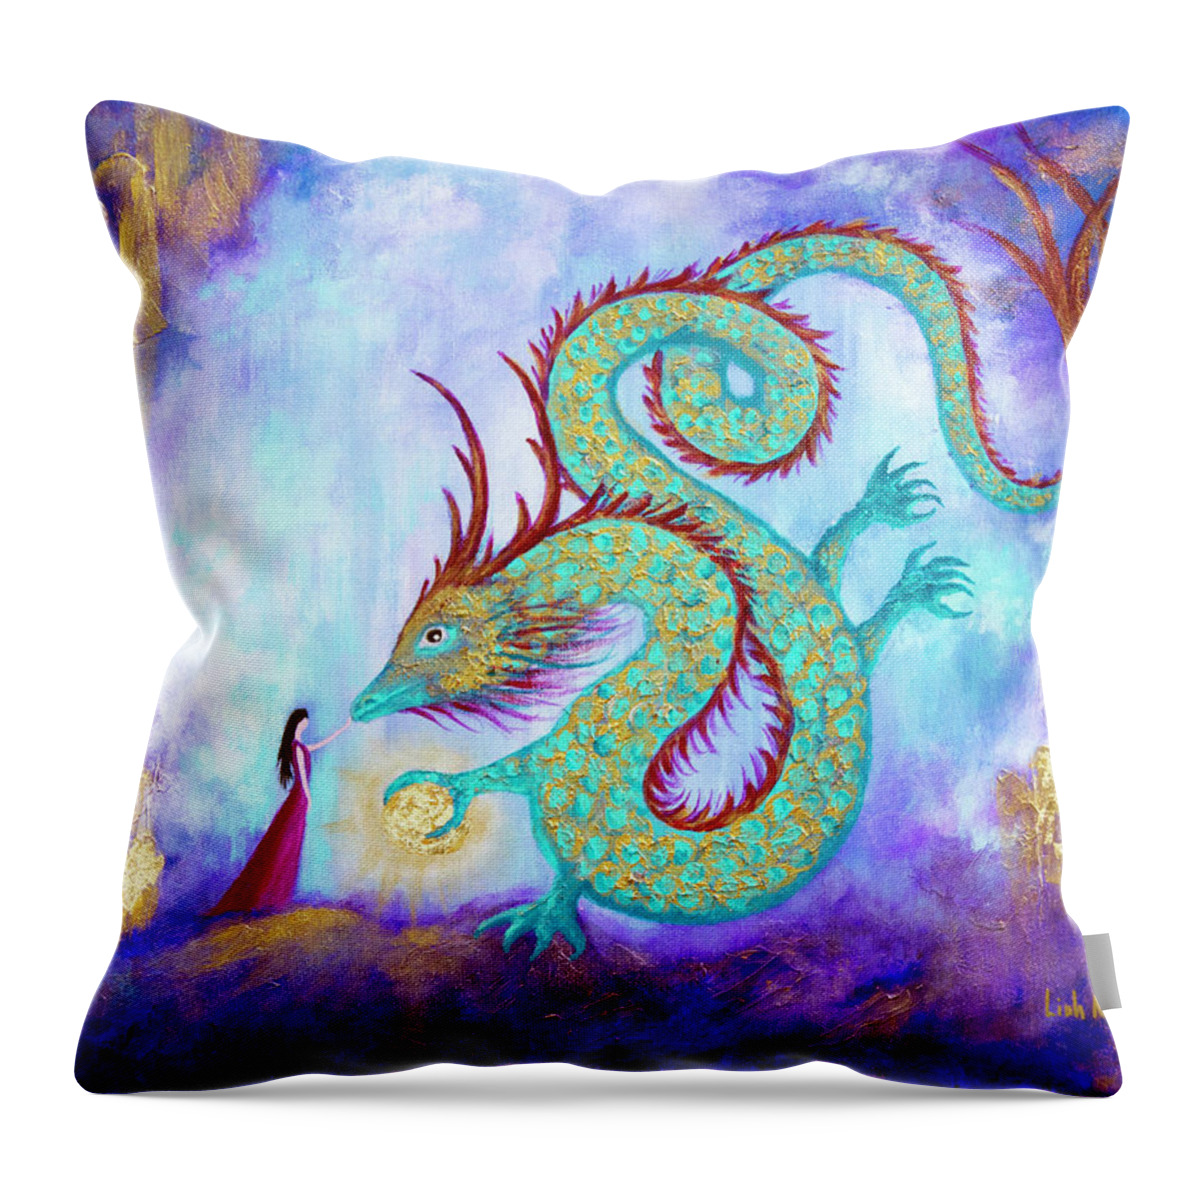 Acrylic Throw Pillow featuring the painting The Introduction by Linh Nguyen-Ng